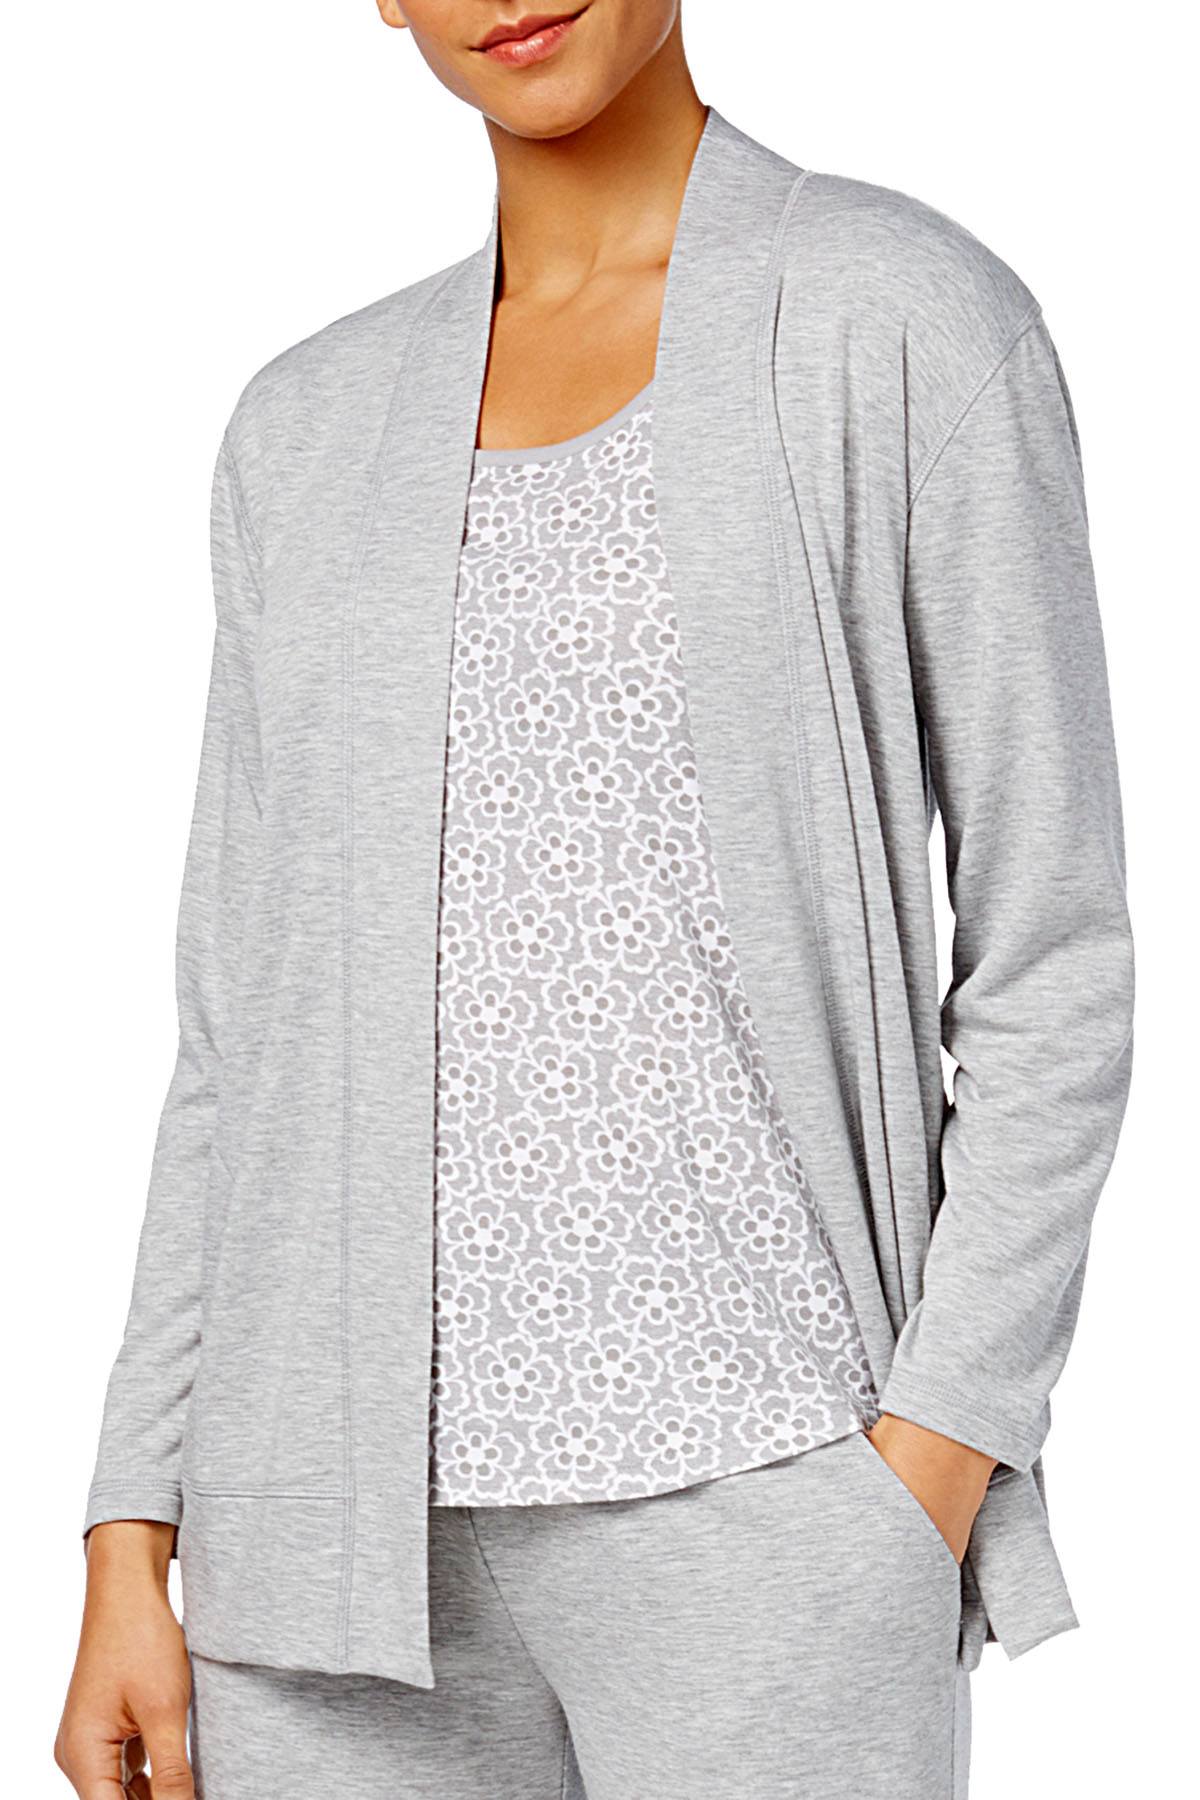 Charter Club Intimates Dove-Grey Open-Front Knit Lounge Cardigan